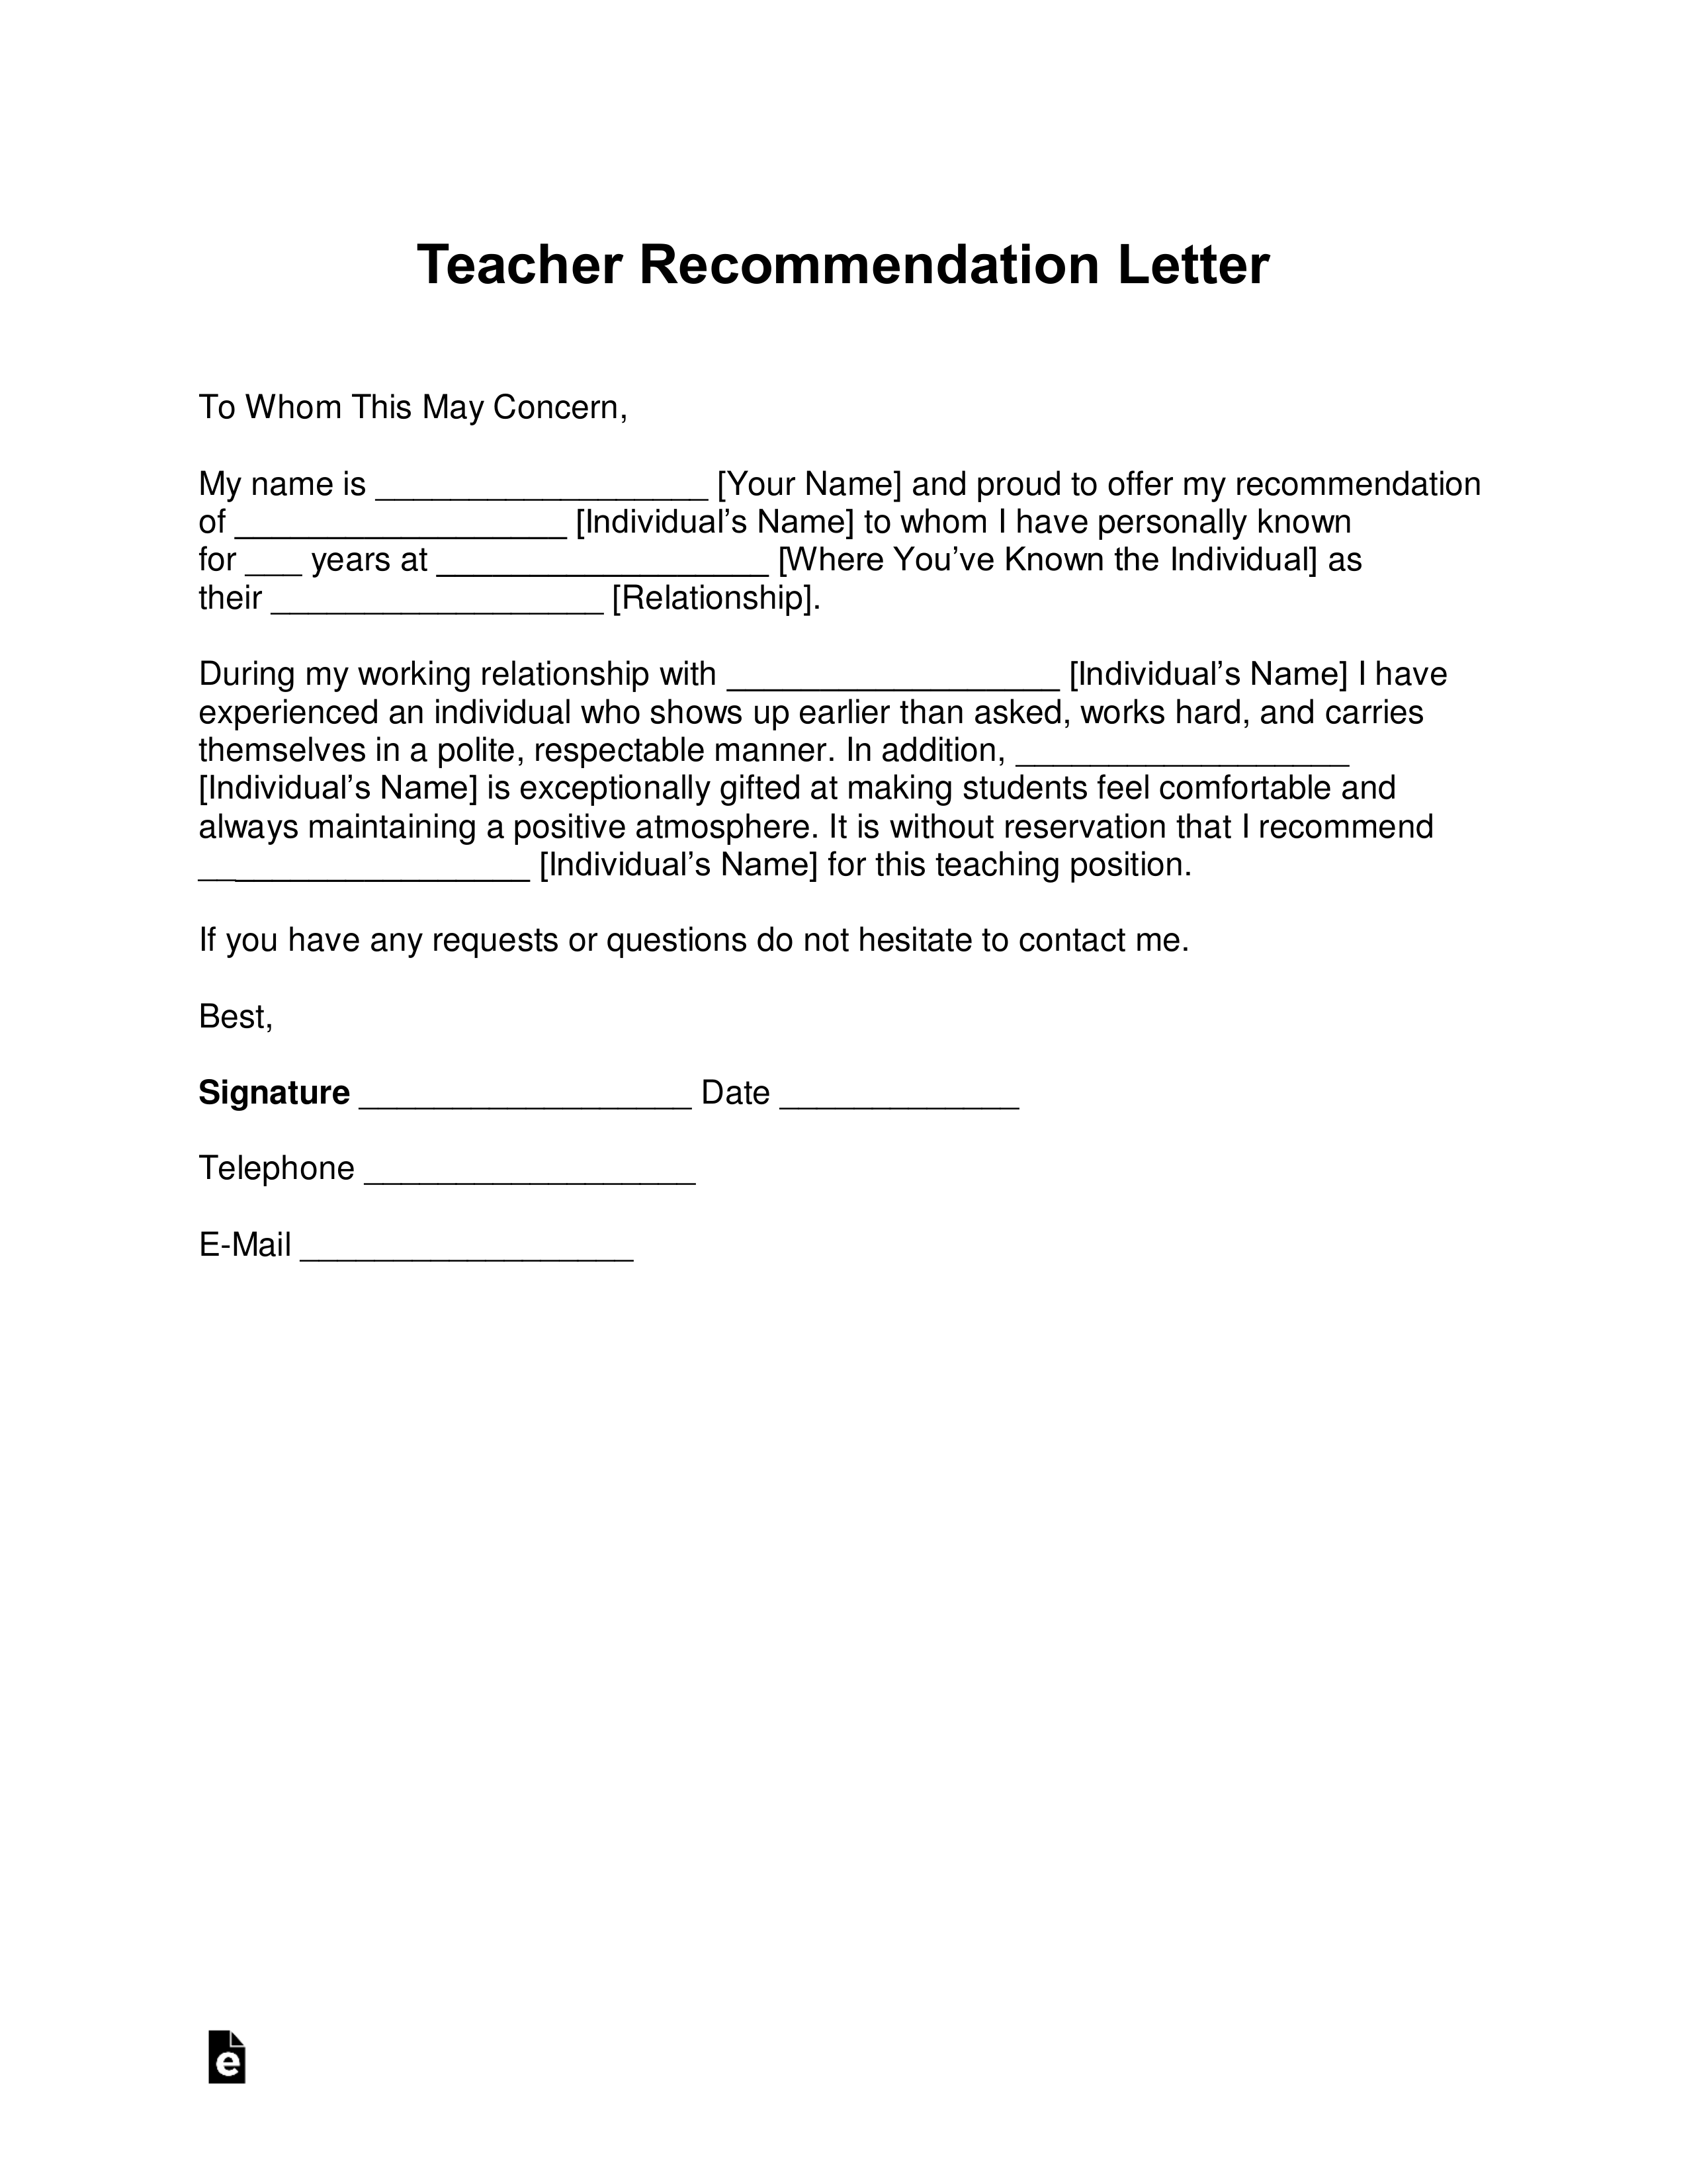 Letter Of Recommendation Samples For Coworker from eforms.com